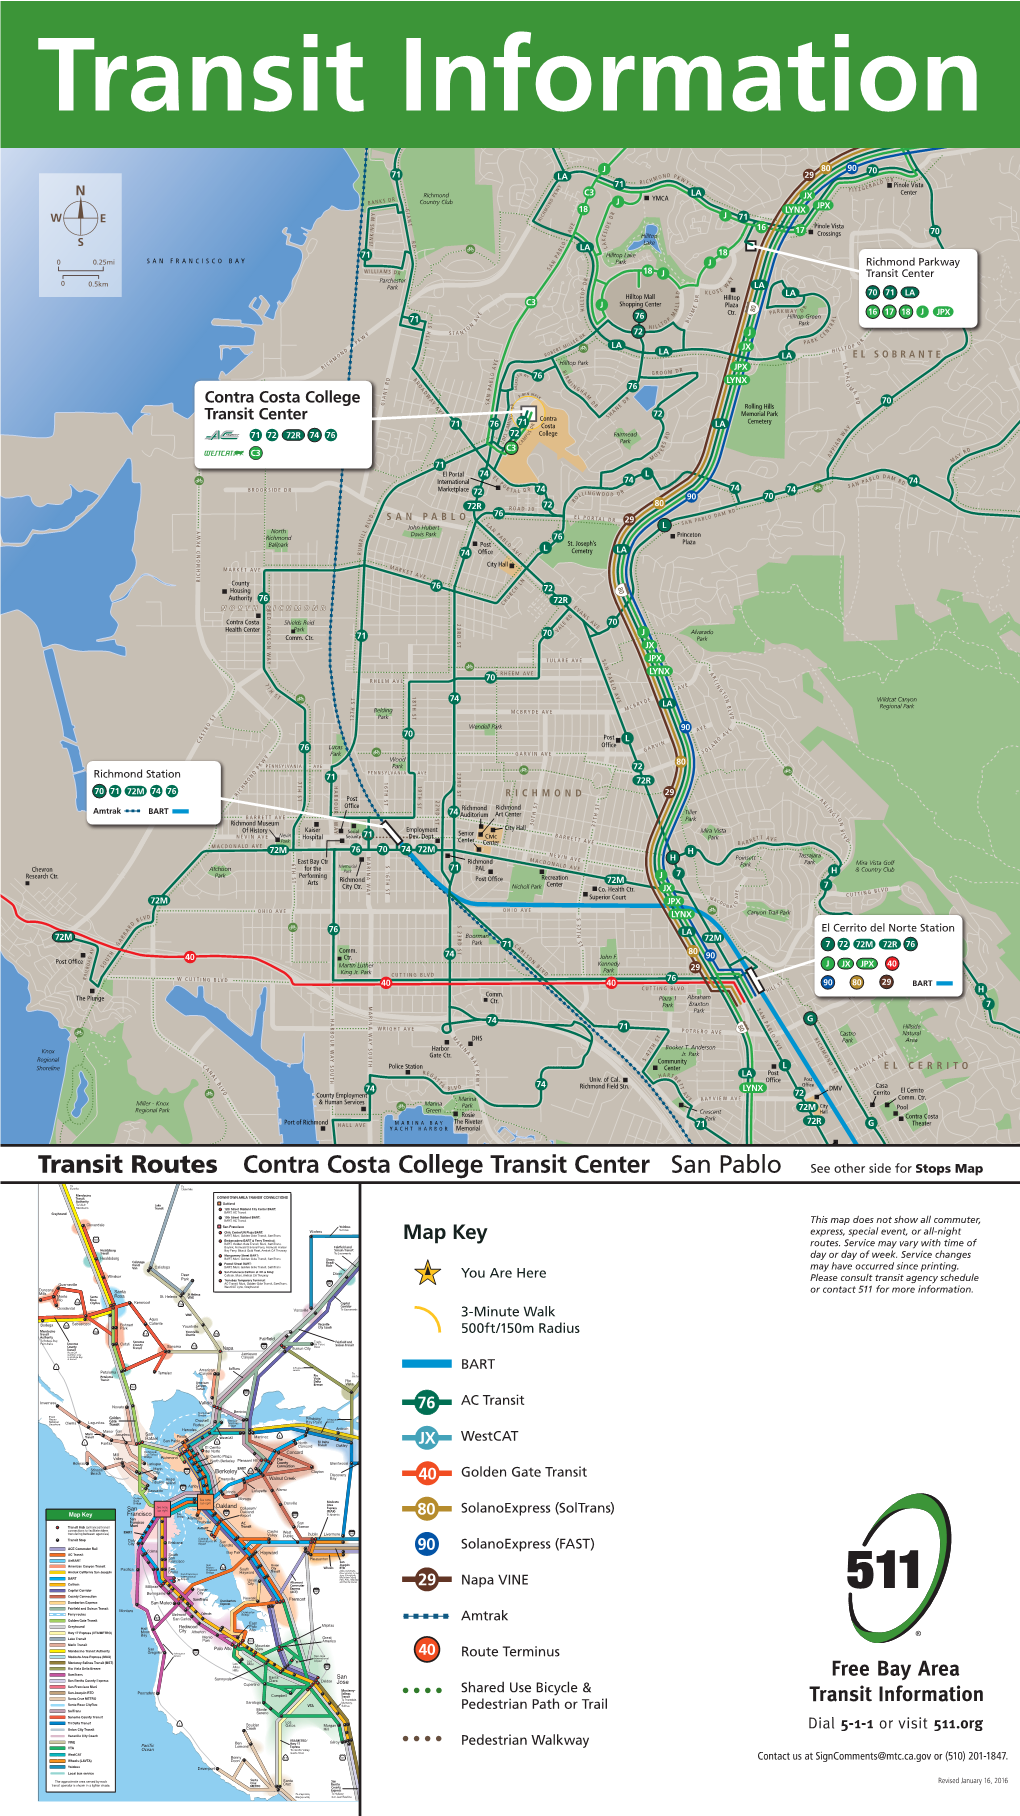 Transit Routes Contra Costa College Transit Center San Pablo See Other Side for Stops